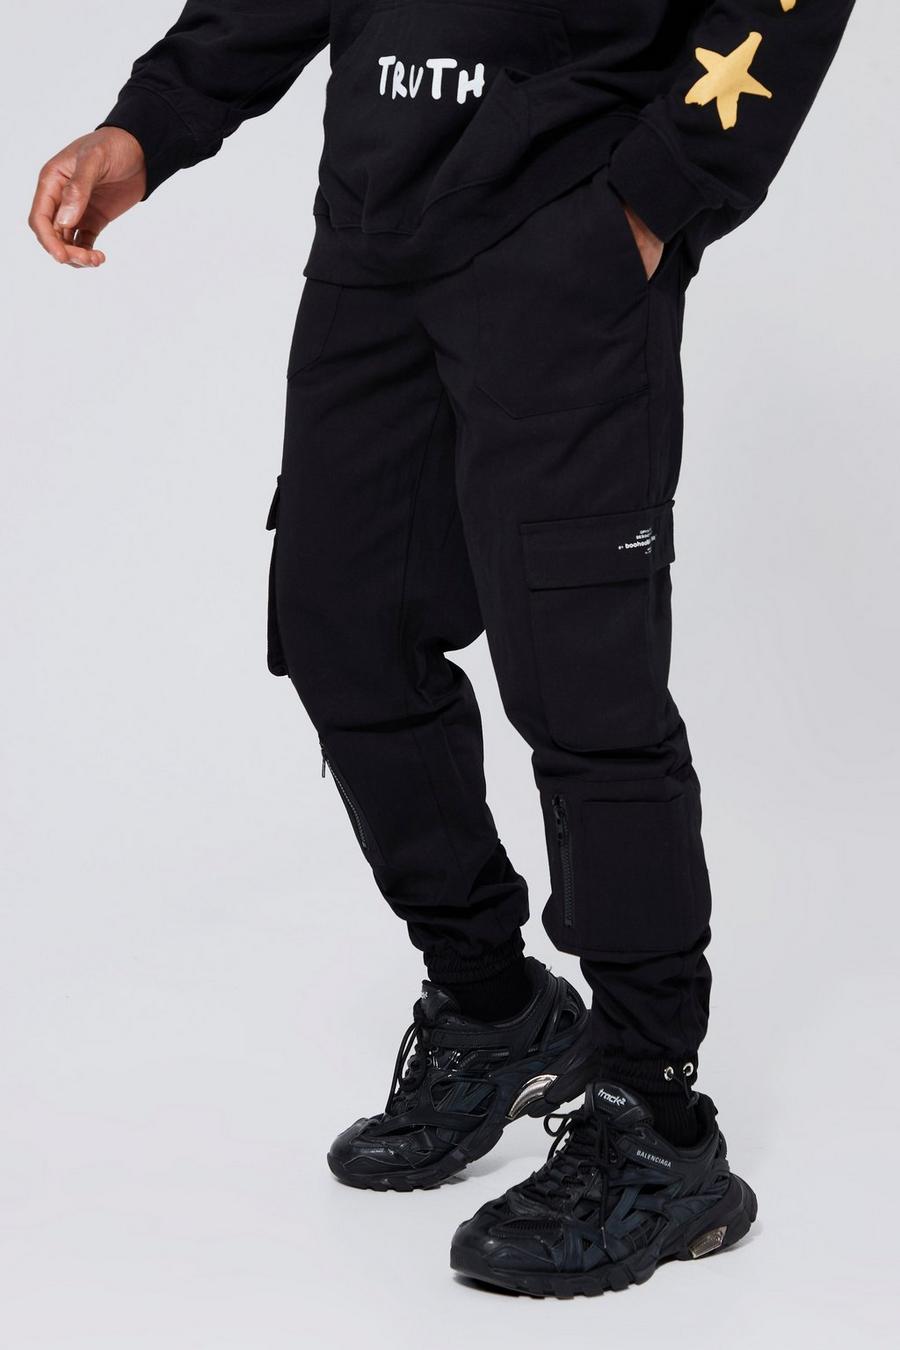 Black noir Straight Leg Twill Cargo Trousers With Bungee